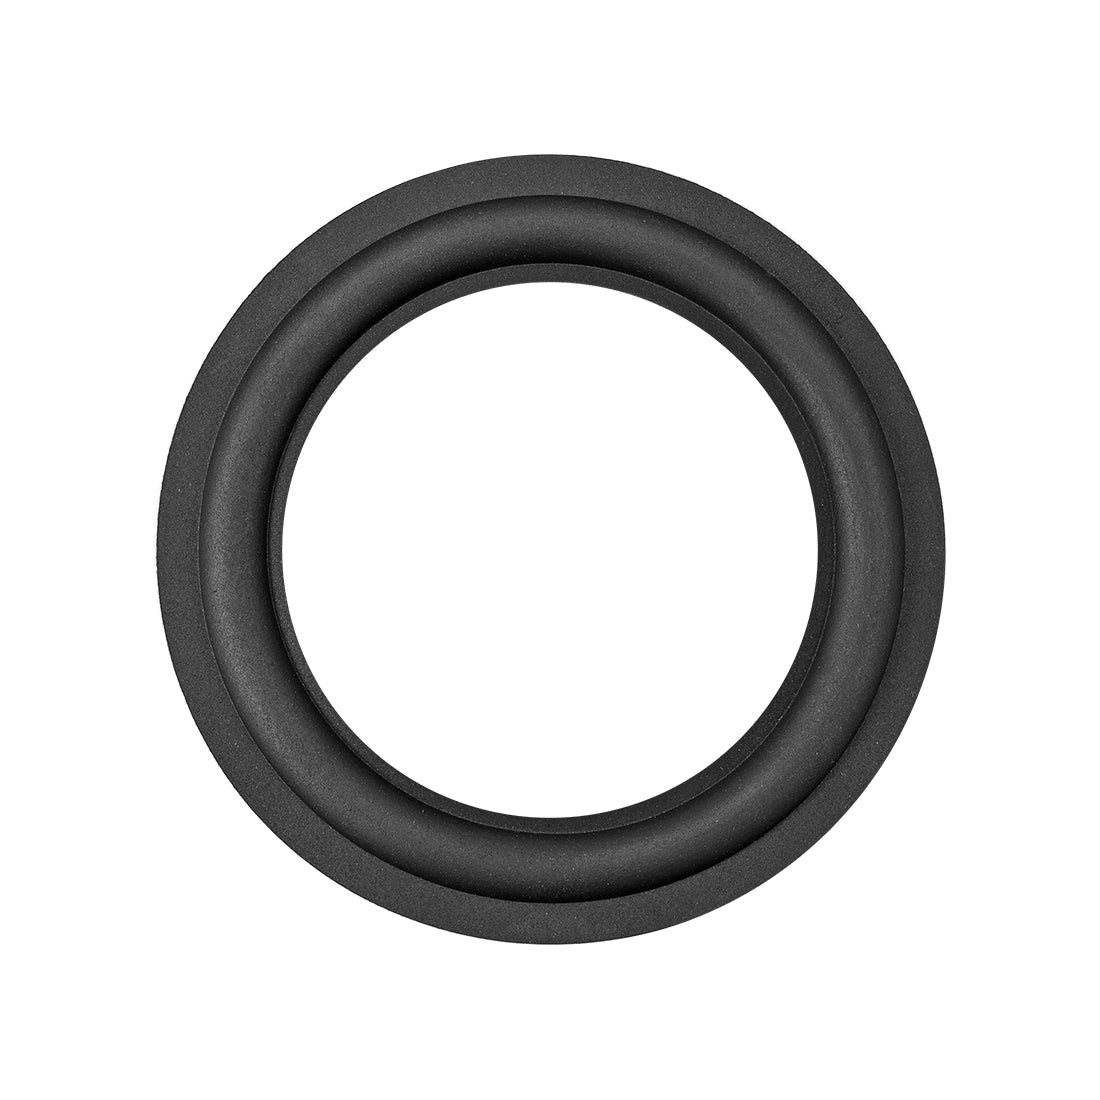 uxcell Uxcell 4.5" 4.5 inch Speaker Rubber Edge Surround Rings Replacement Part for Speaker Repair or DIY